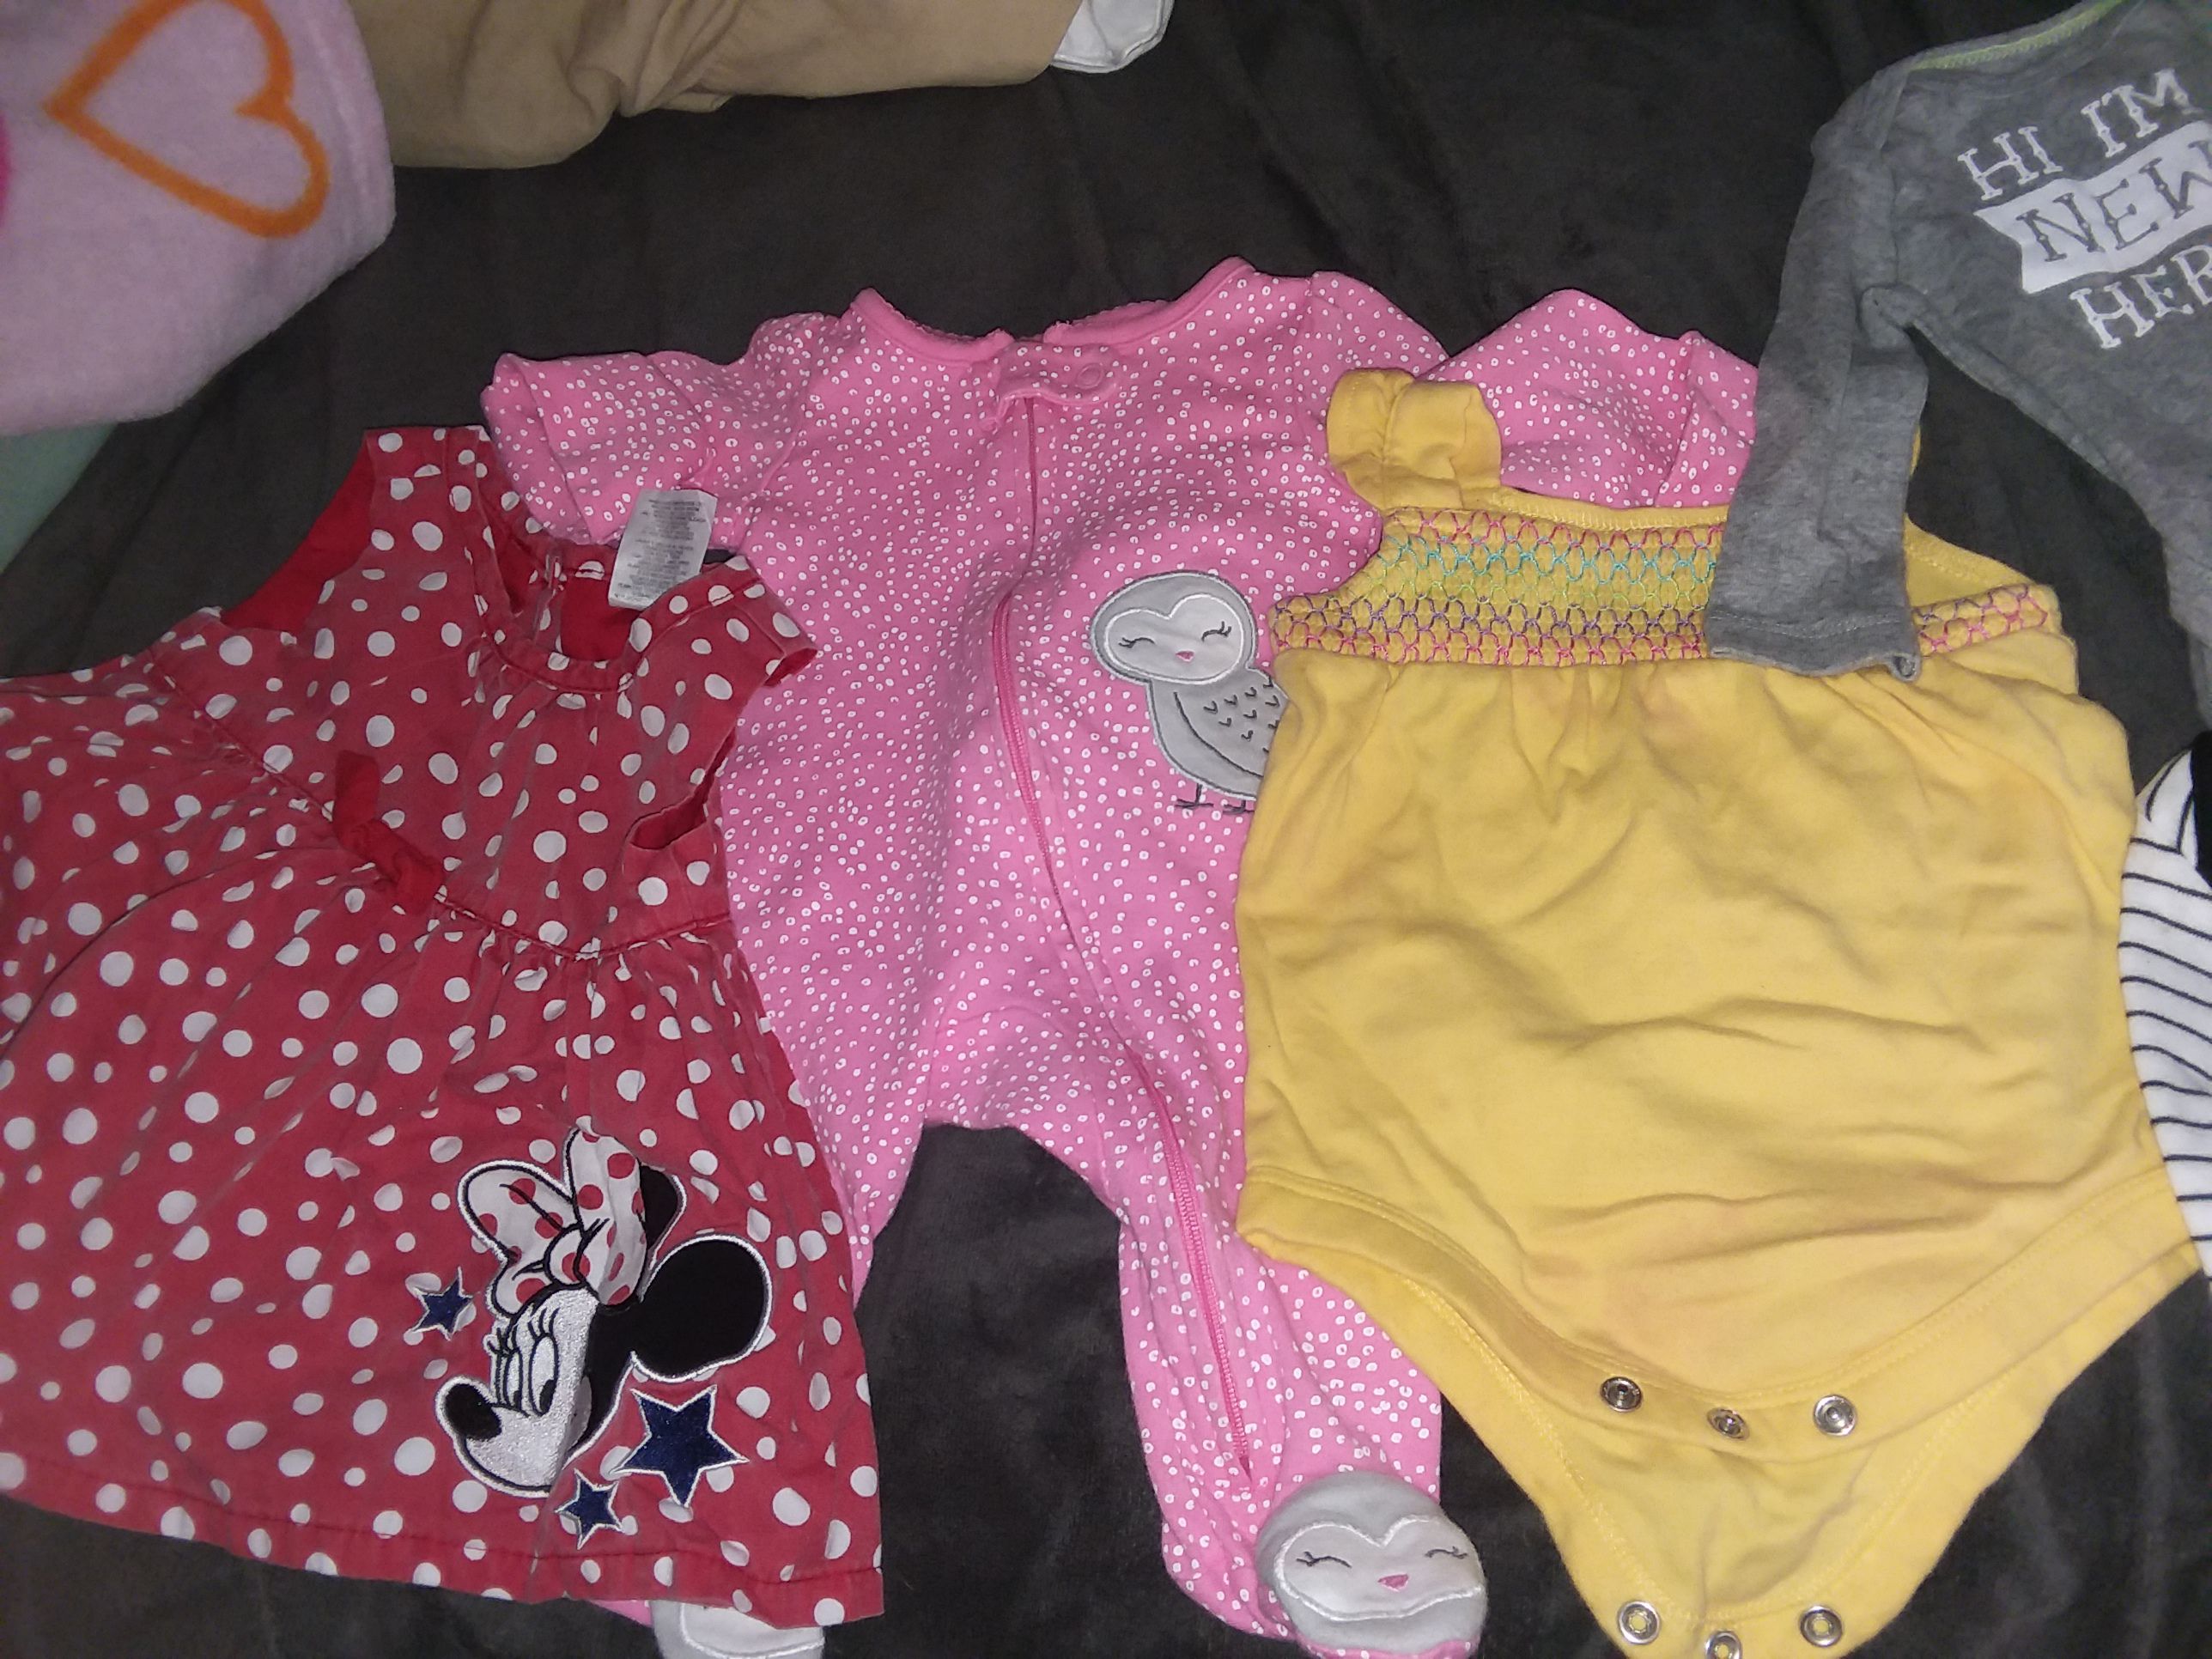 I have some newborn clothes 5 boy onsies (New)$5 and multiple girl nb outfits also a 2pack of newborn size pampers swaddlers diapers 96 count for $20